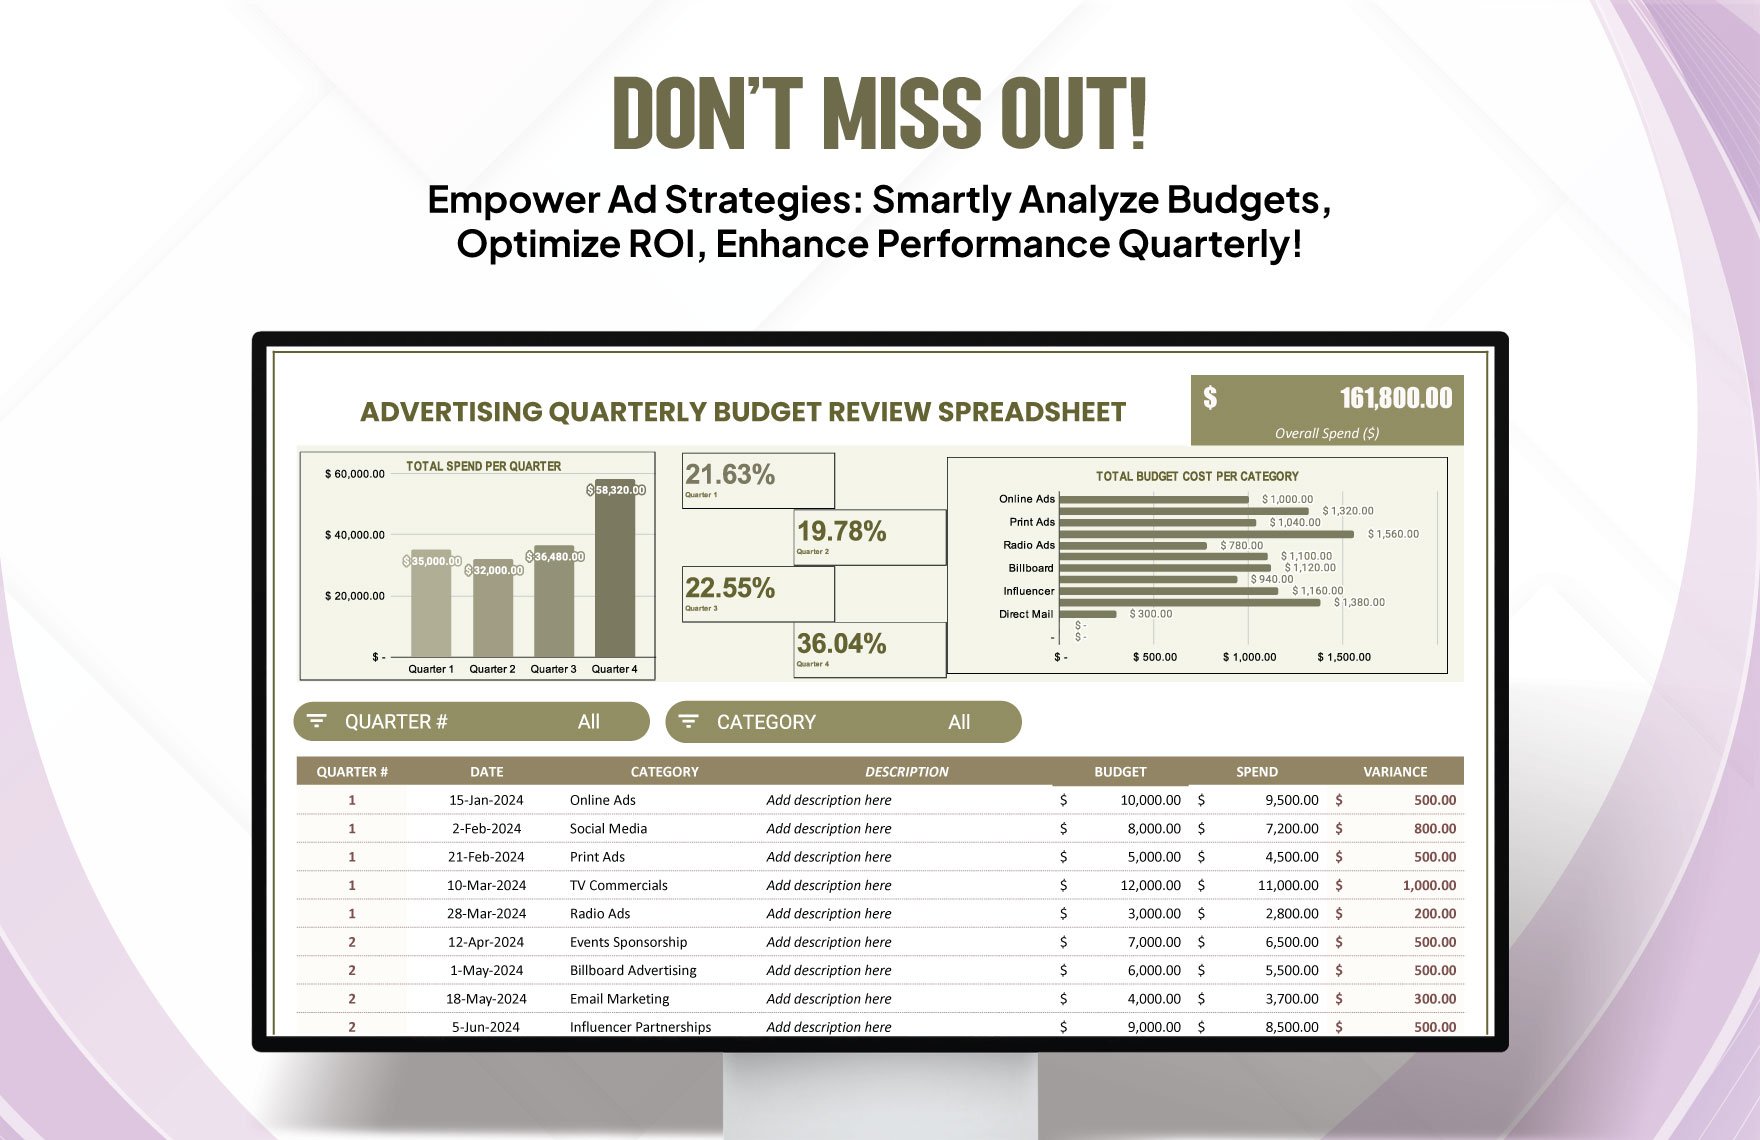 Advertising Quarterly Budget Review Spreadsheet Template